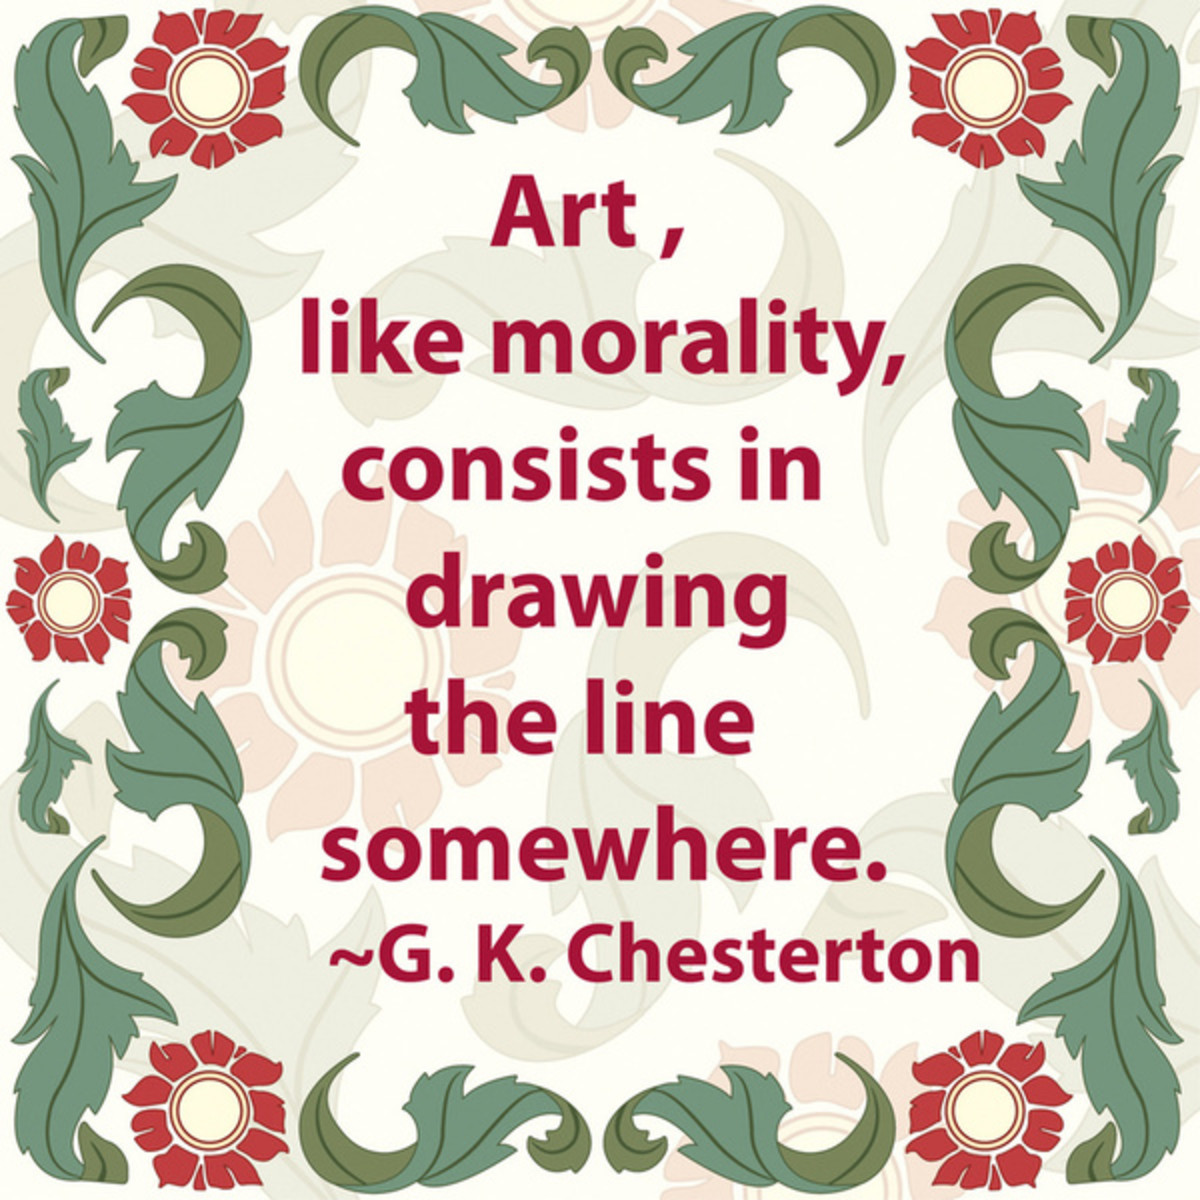 Quote by G. K. Chesterton